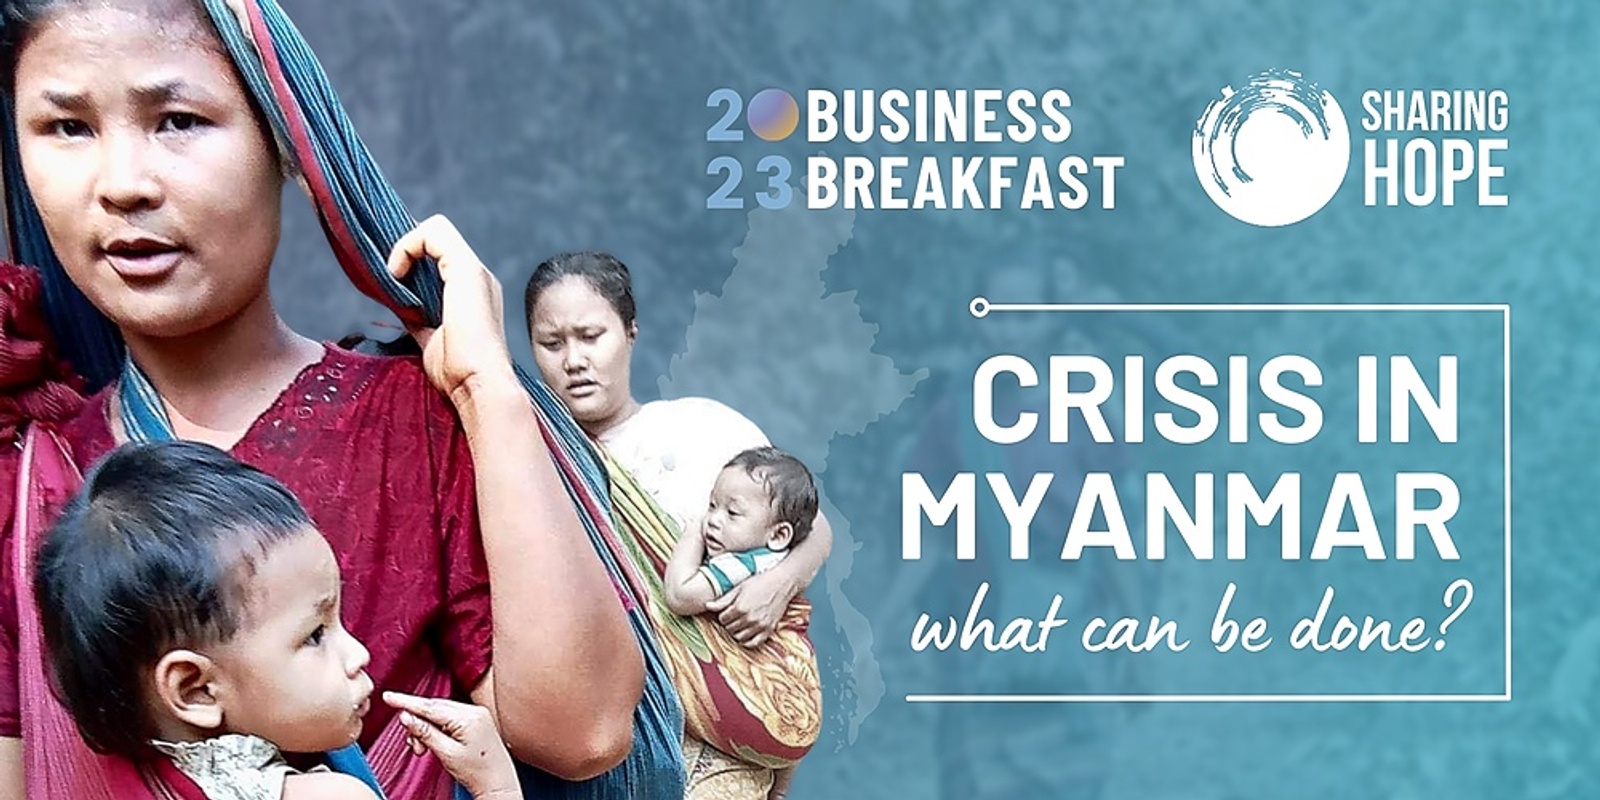 Crisis in Myanmar: what can be done? Sharing Hope Business Breakfast